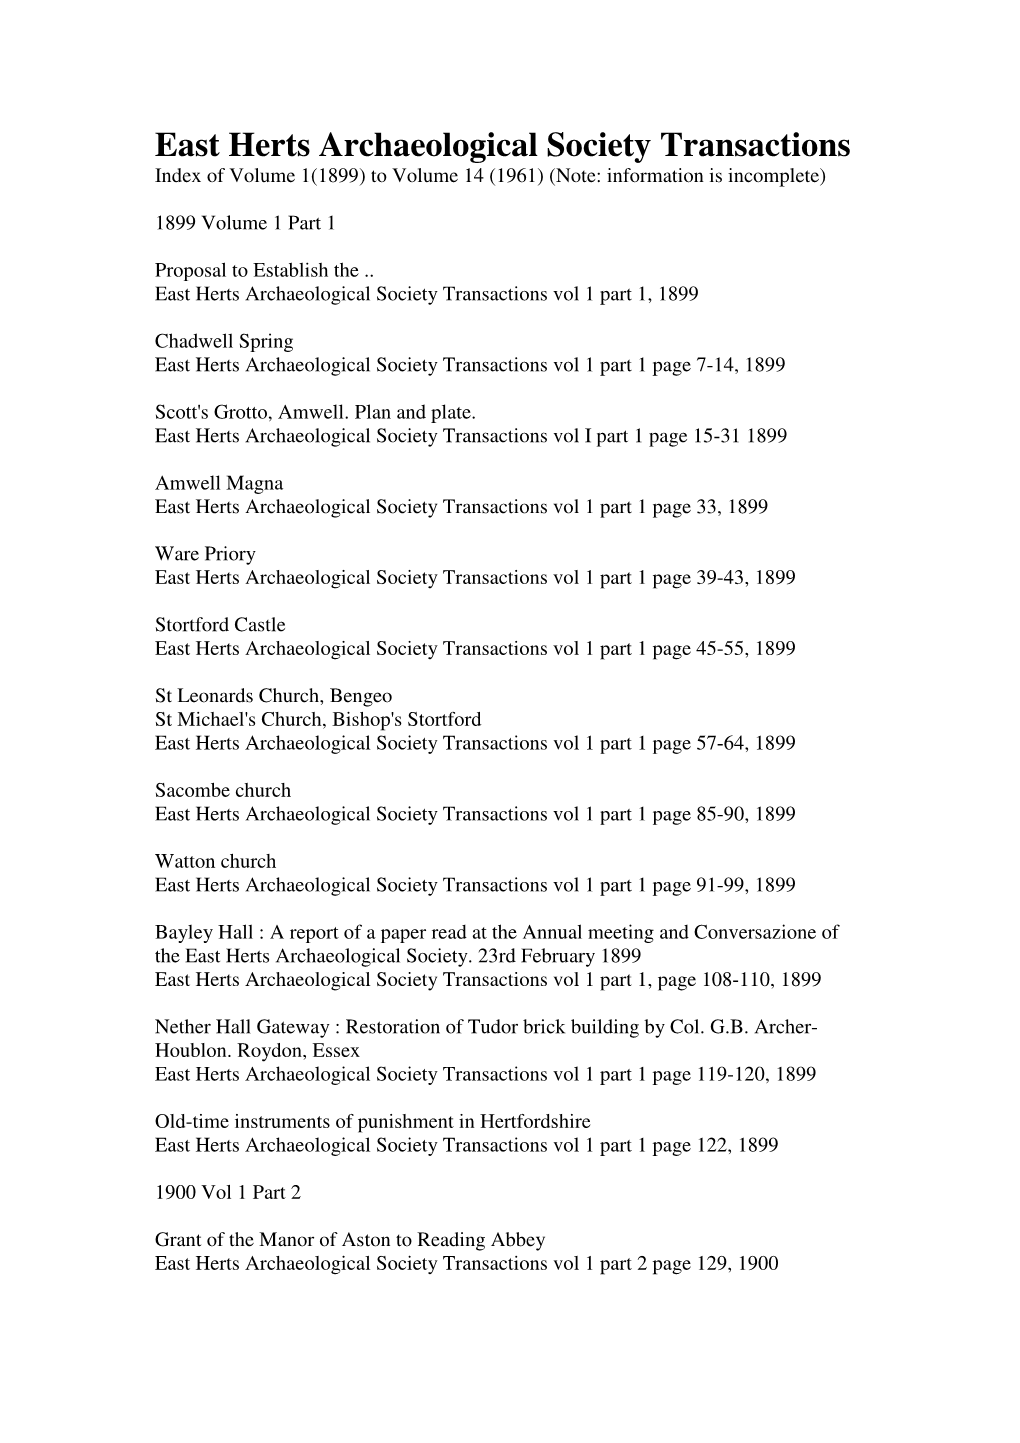 East Herts Archaeological Society Transactions Index of Volume 1(1899) to Volume 14 (1961) (Note: Information Is Incomplete)